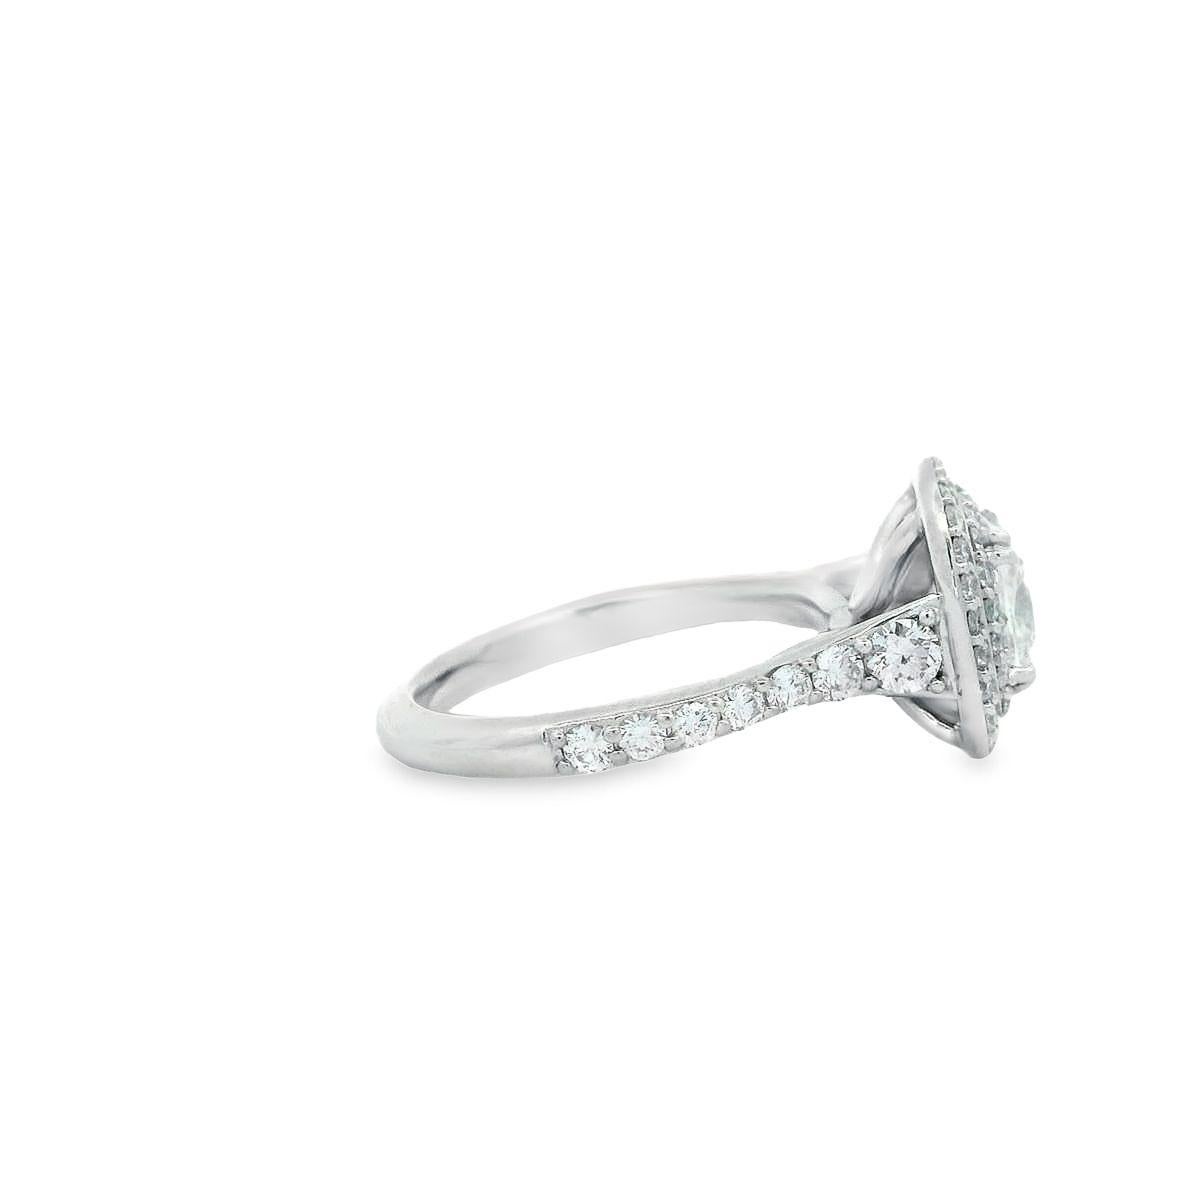 Alex & Co GIA 1.53ct F VS2 Cushion Diamond Double Halo Platinum Engagement Ring  In New Condition For Sale In Newton, MA